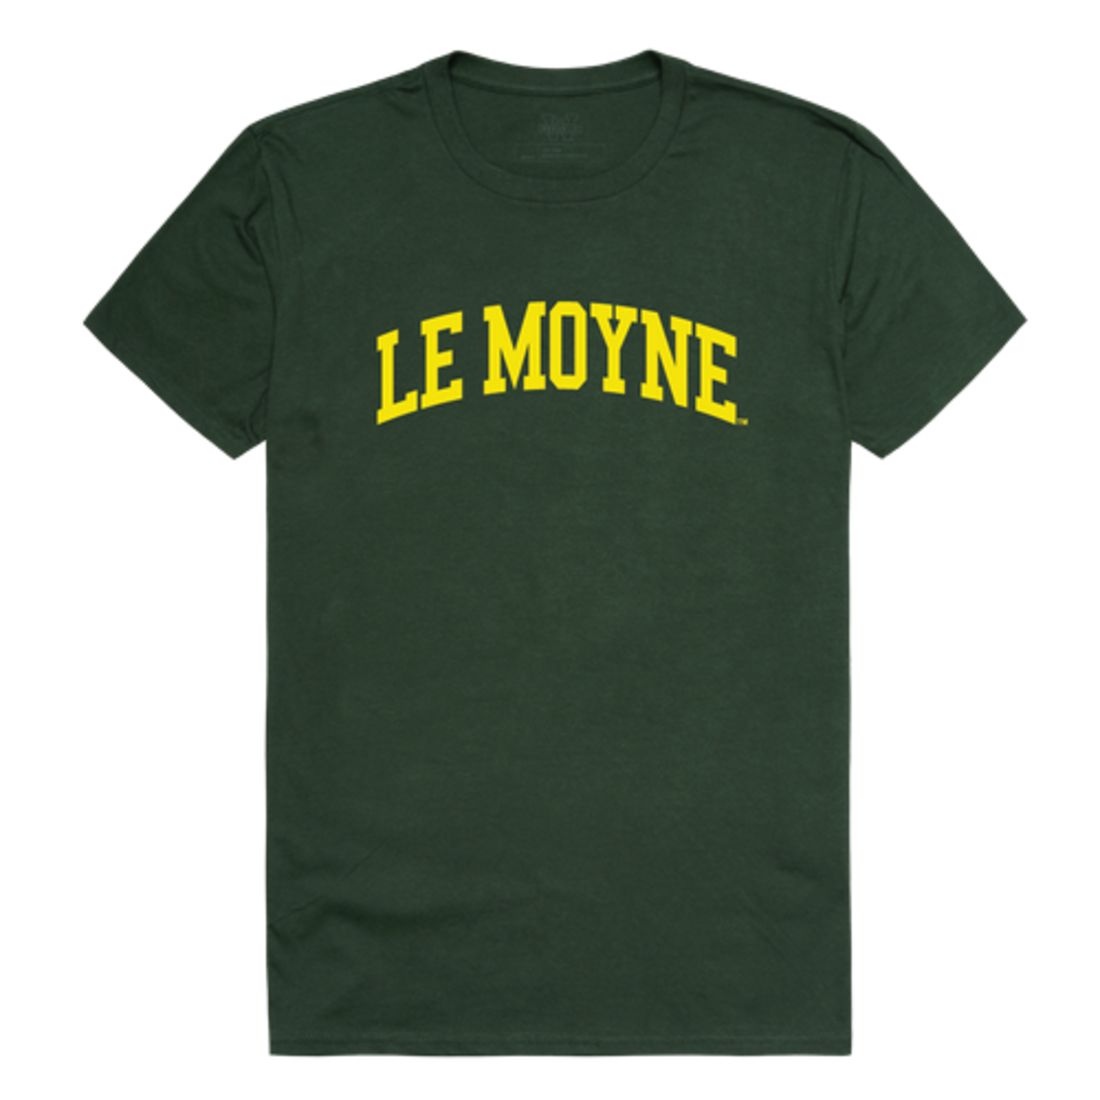 Le Moyne College Dolphins Collegiate T-Shirt Tee